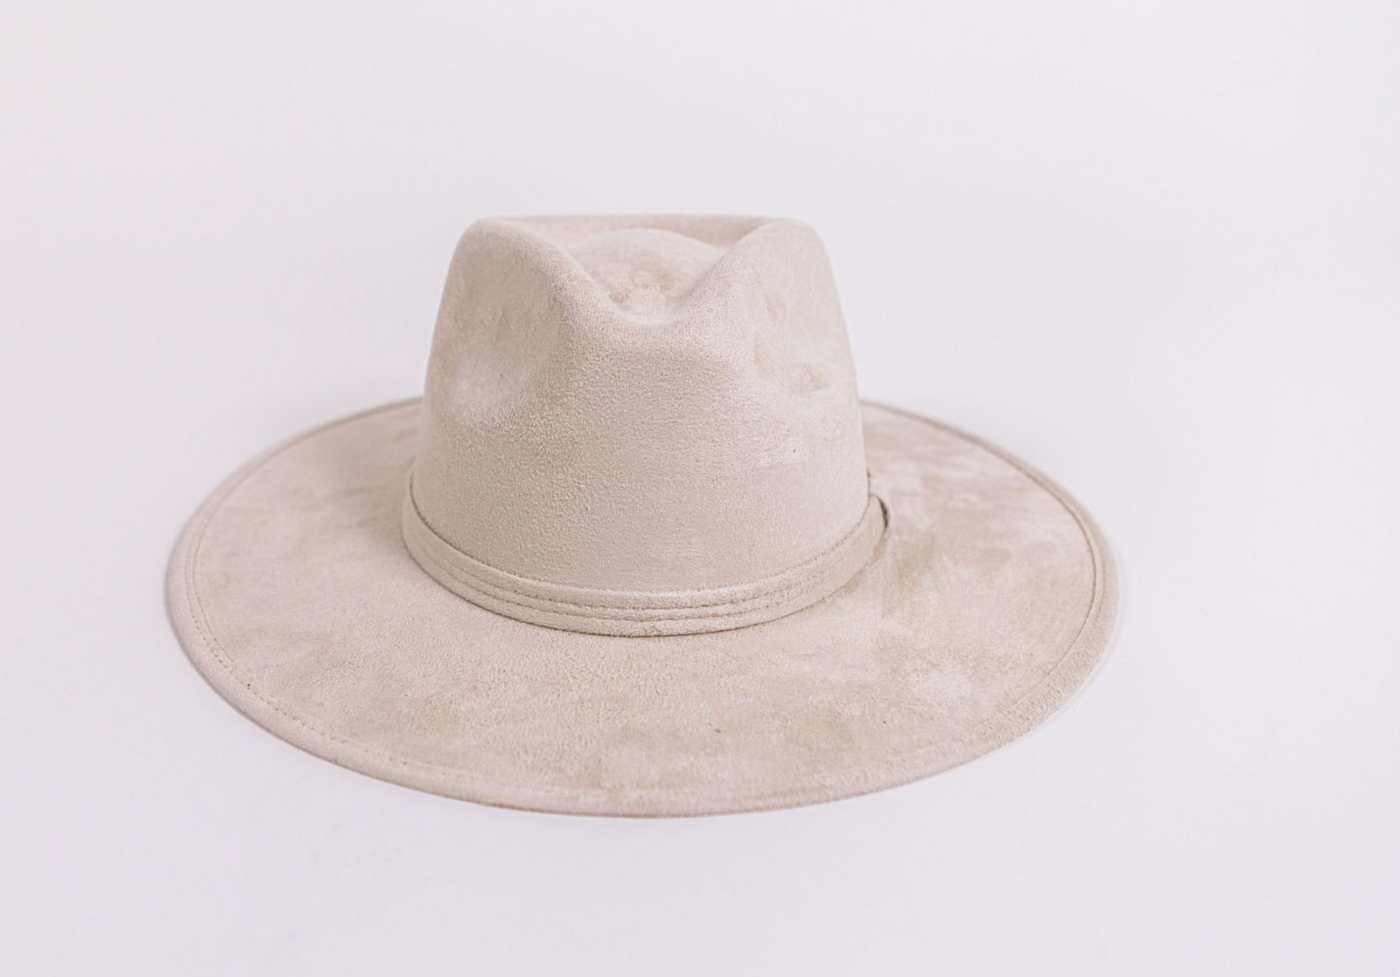 Angie's Signature collection Vegan Faux Suede Textured Rancher's Fedora